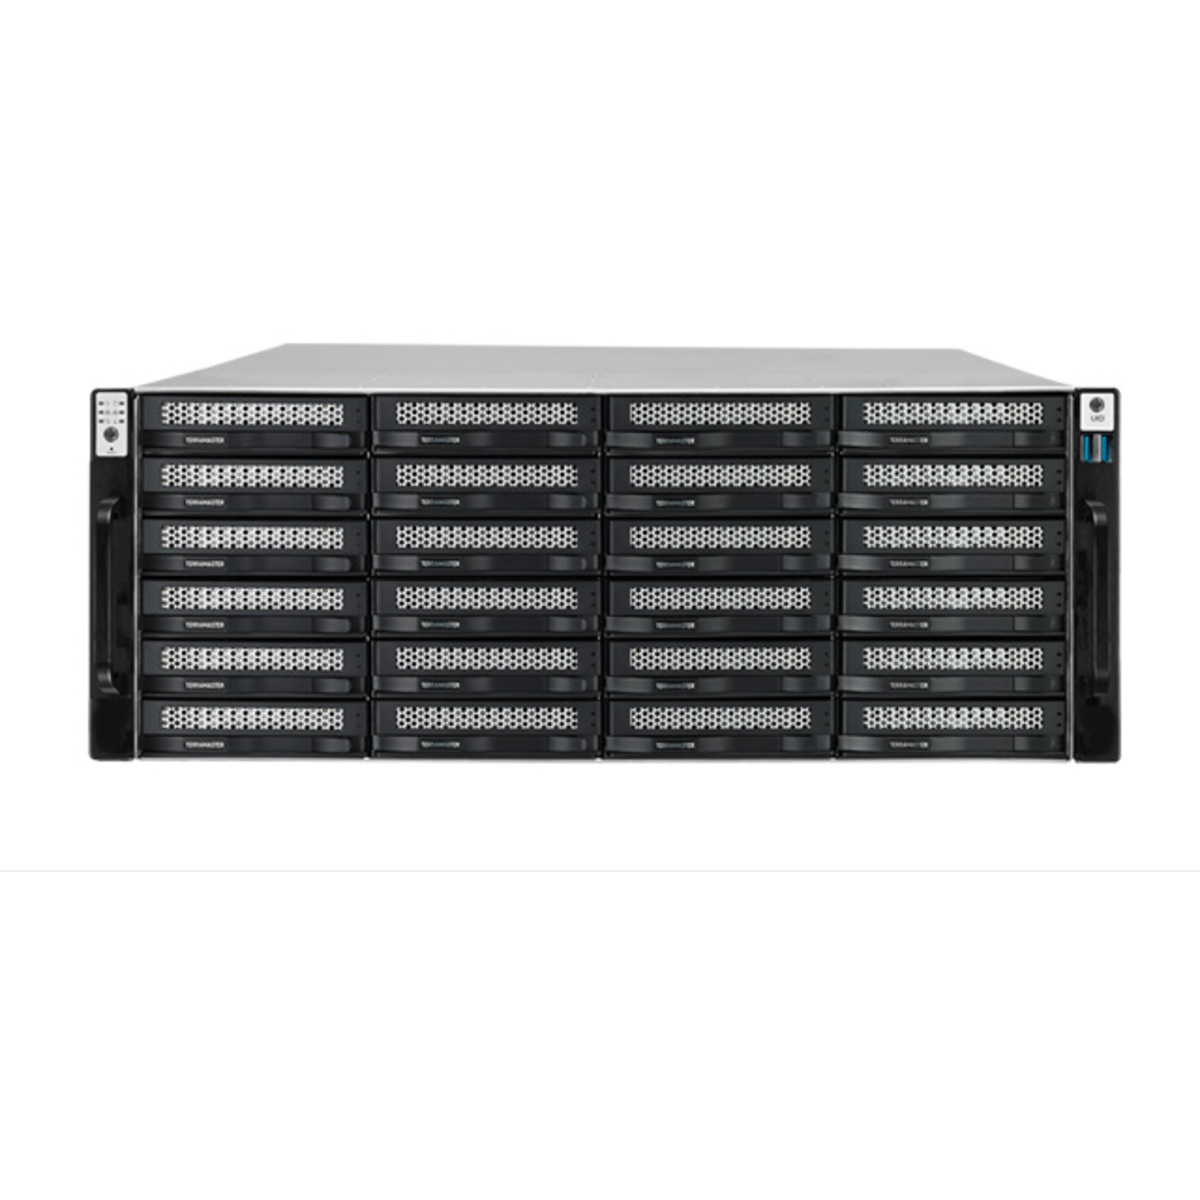 TerraMaster U24-722-2224 44tb 24-Bay RackMount Large Business / Enterprise NAS - Network Attached Storage Device 22x2tb Samsung 870 QVO MZ-77Q2T0 2.5 560/530MB/s SATA 6Gb/s SSD CONSUMER Class Drives Installed - Burn-In Tested U24-722-2224